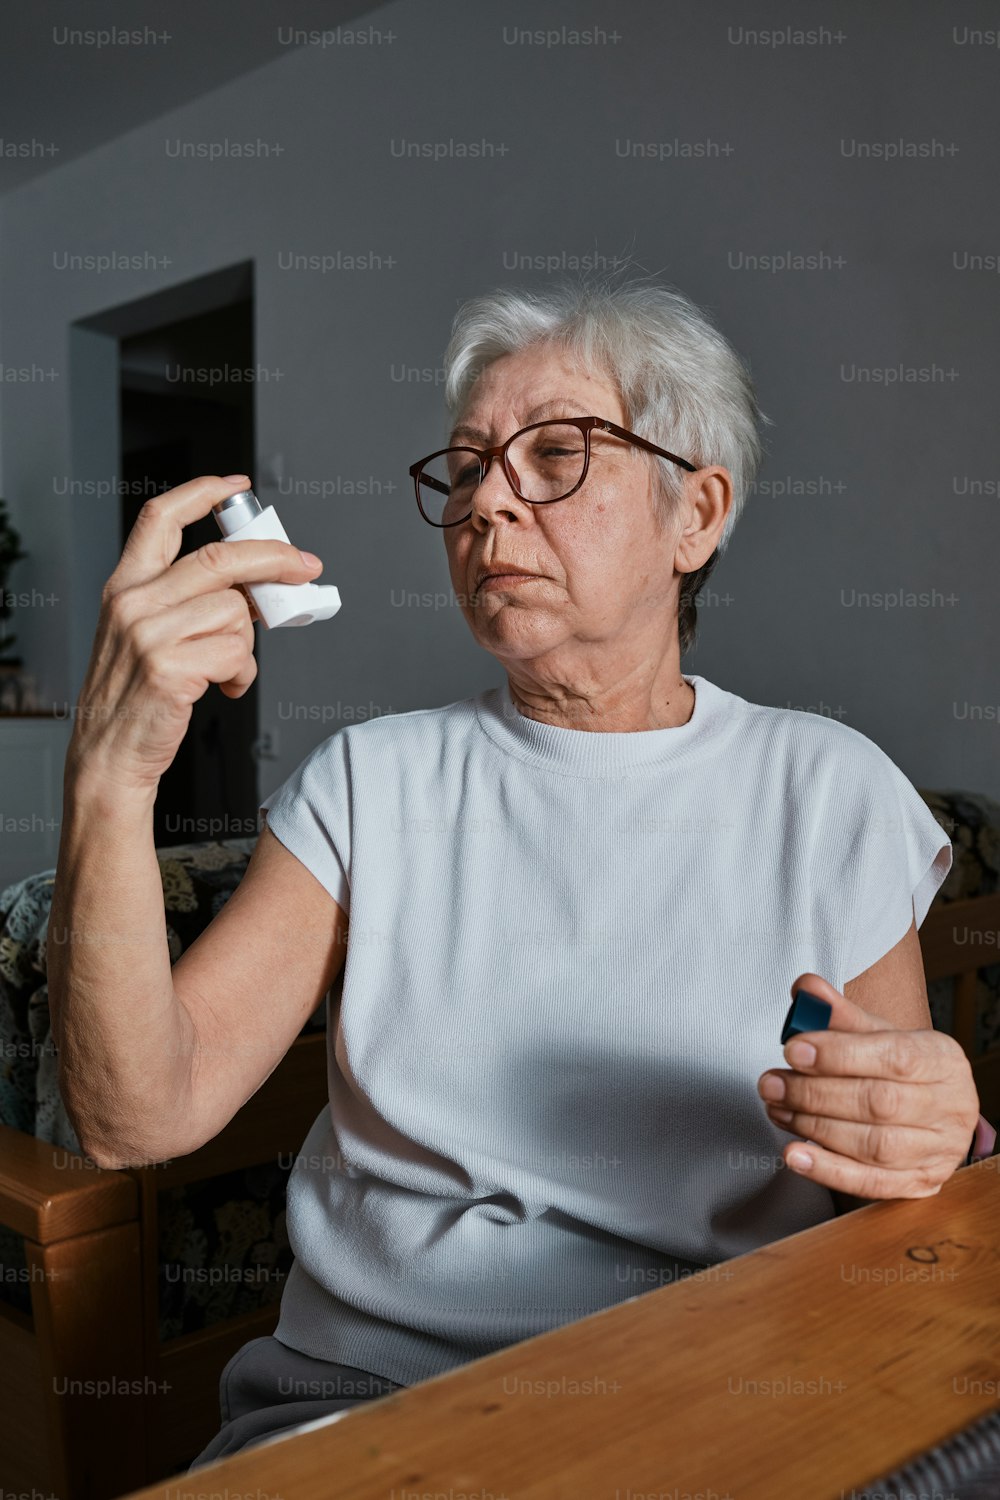 a woman sitting at a table holding a remote control